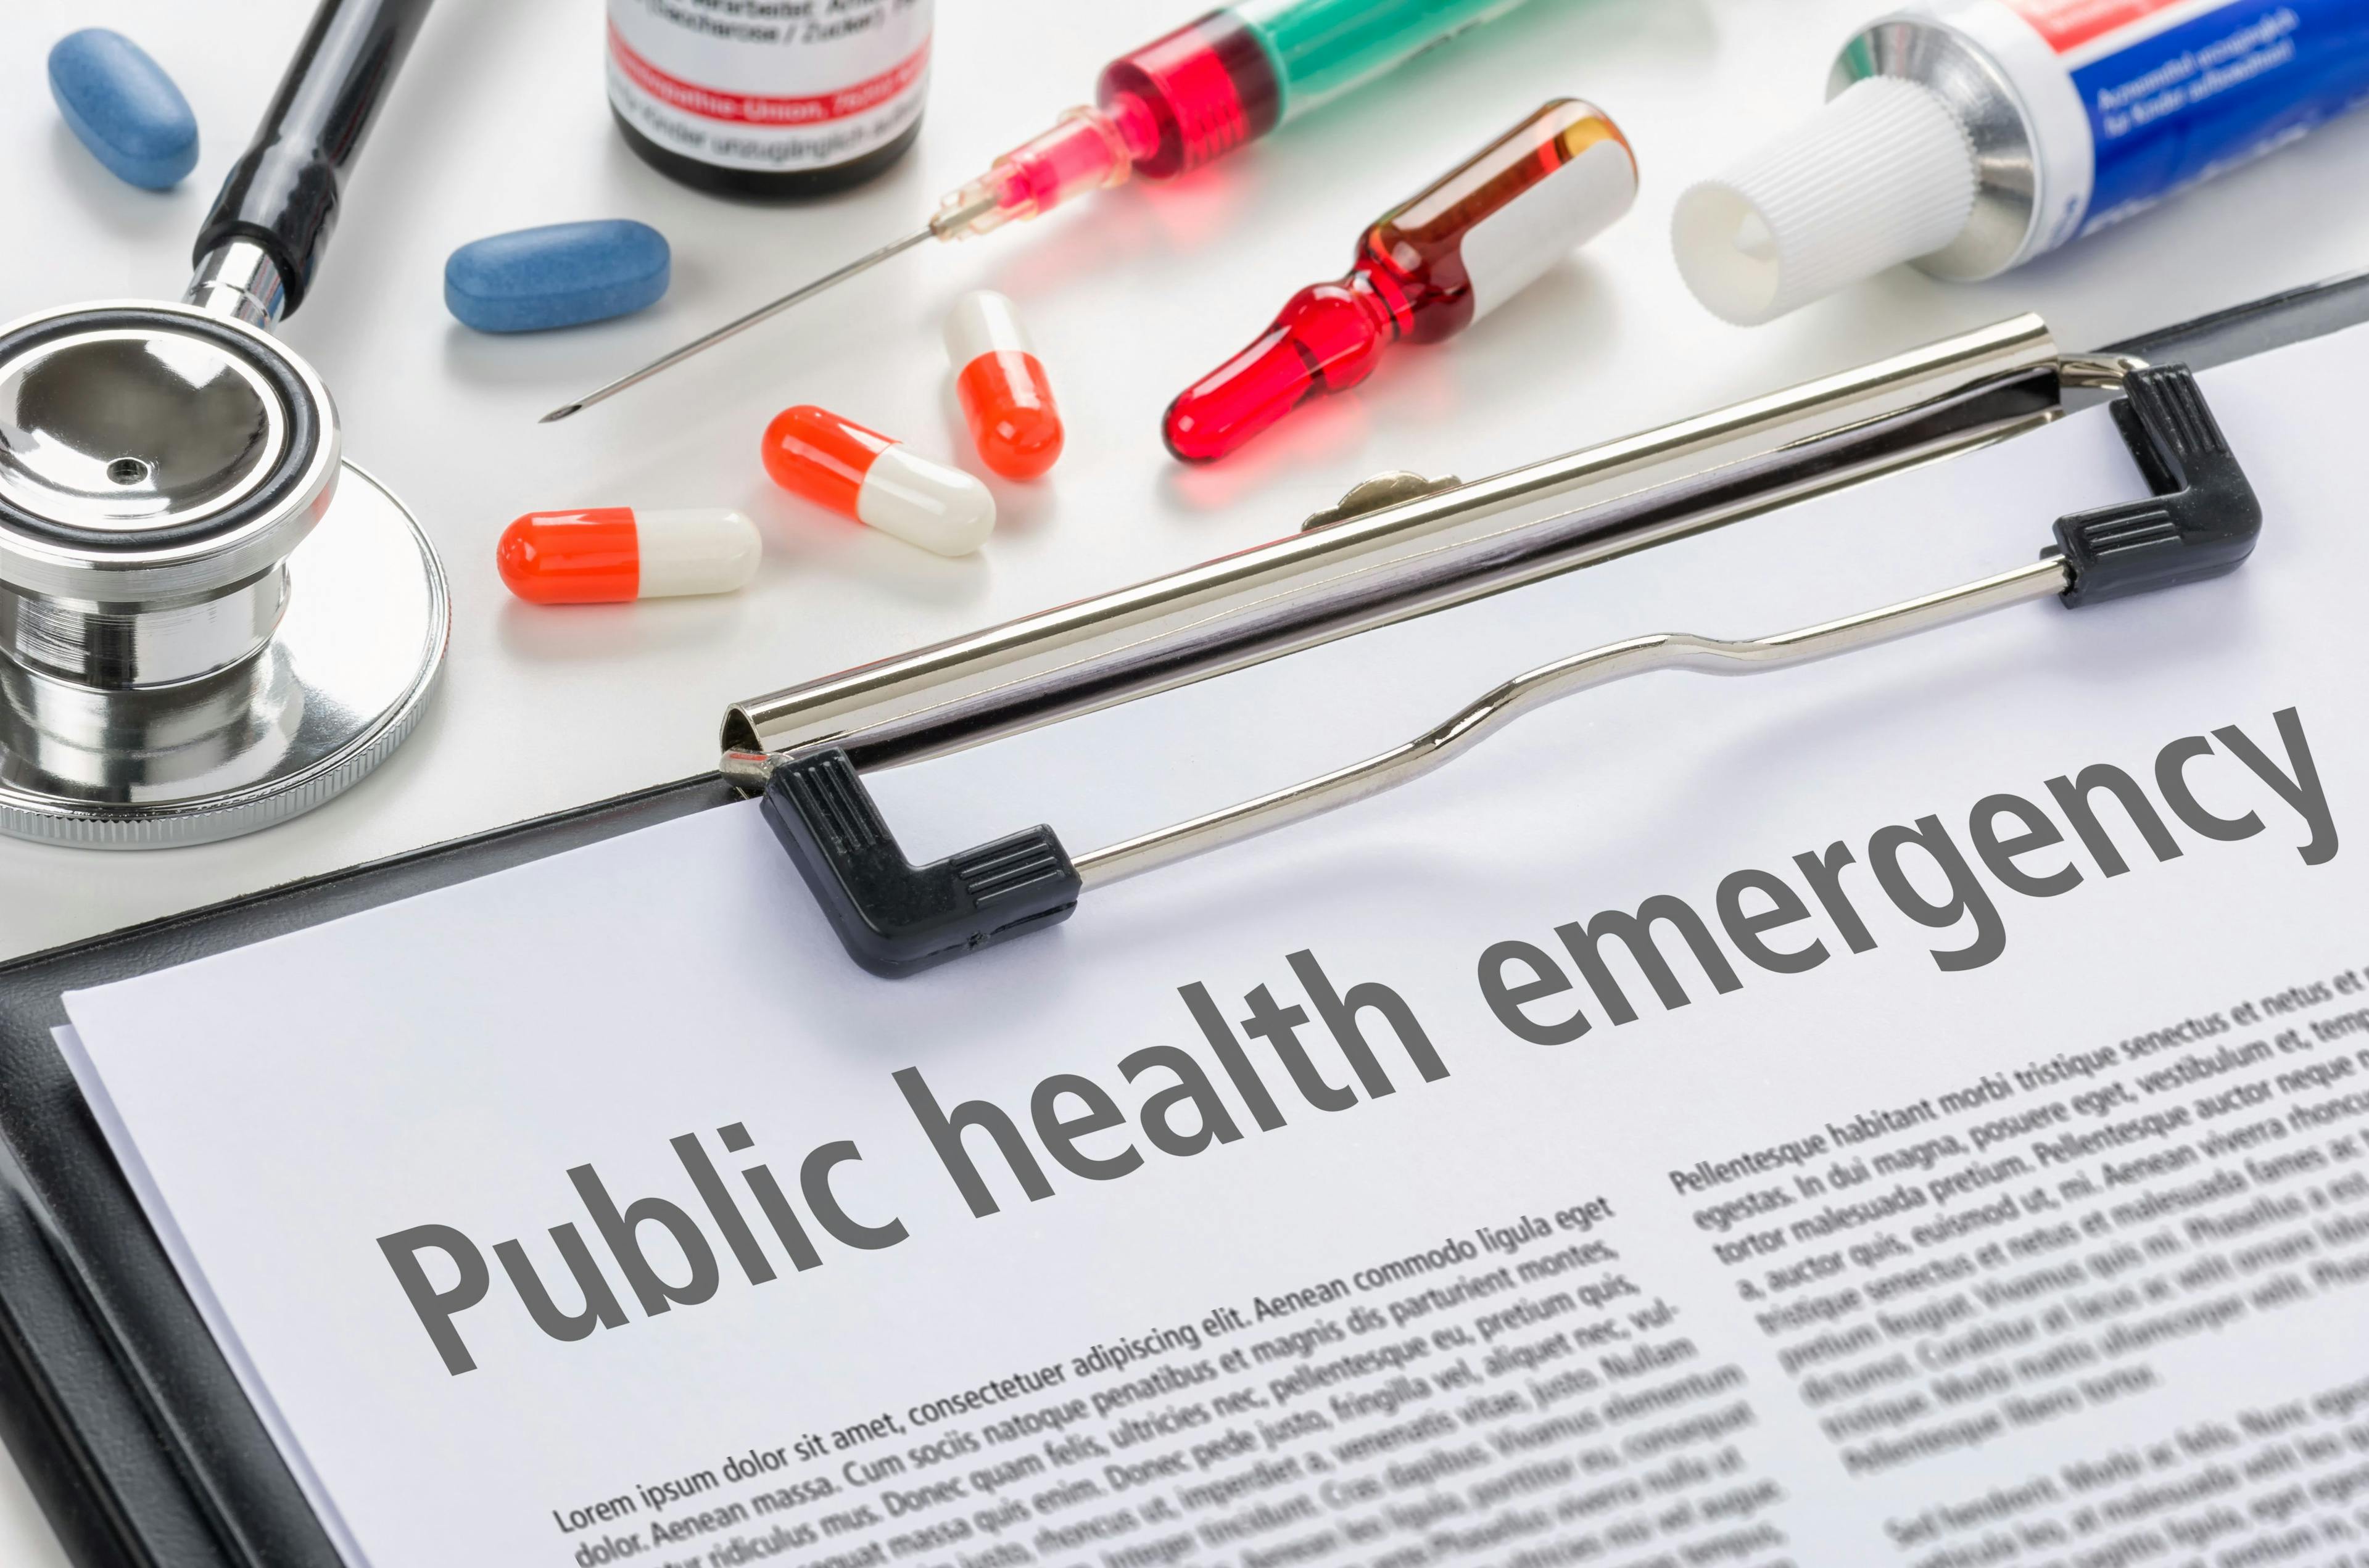 The COVID-19 Public Health Emergency Renews for the 12th Time